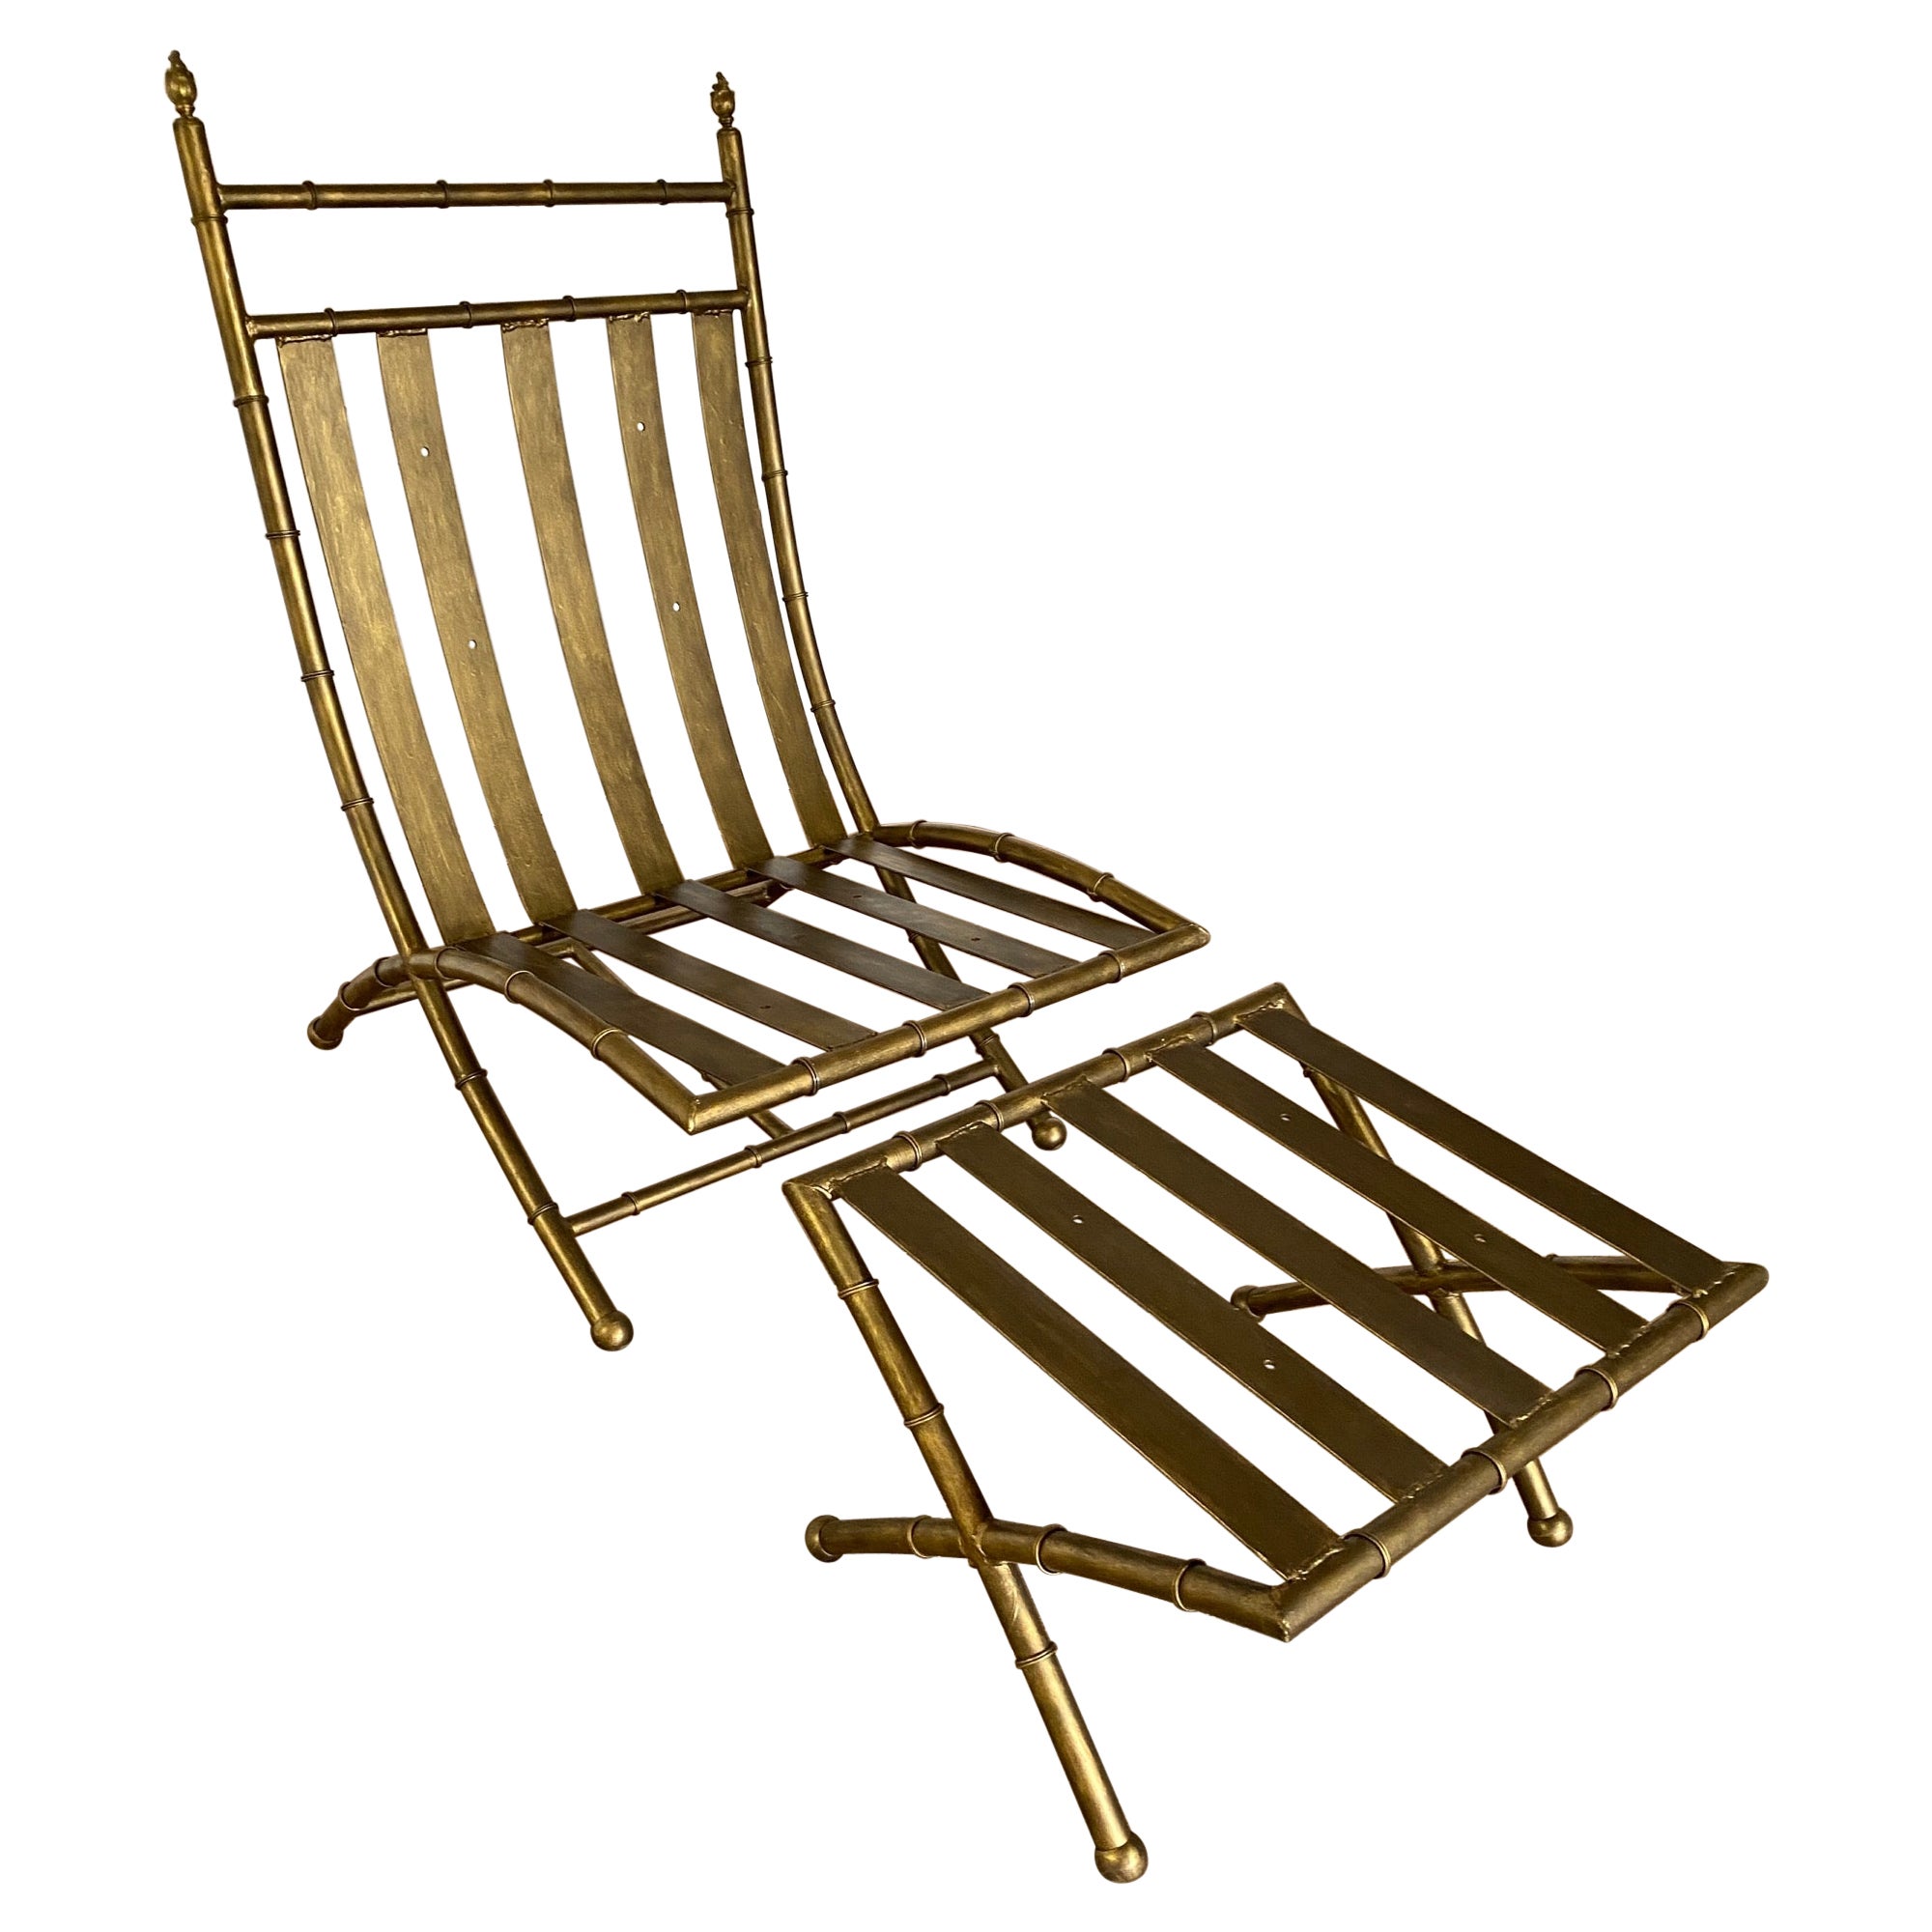 Maison Jansen Style Faux Bamboo Bronzed Tone Indoor or Outdoor Lounge Chair